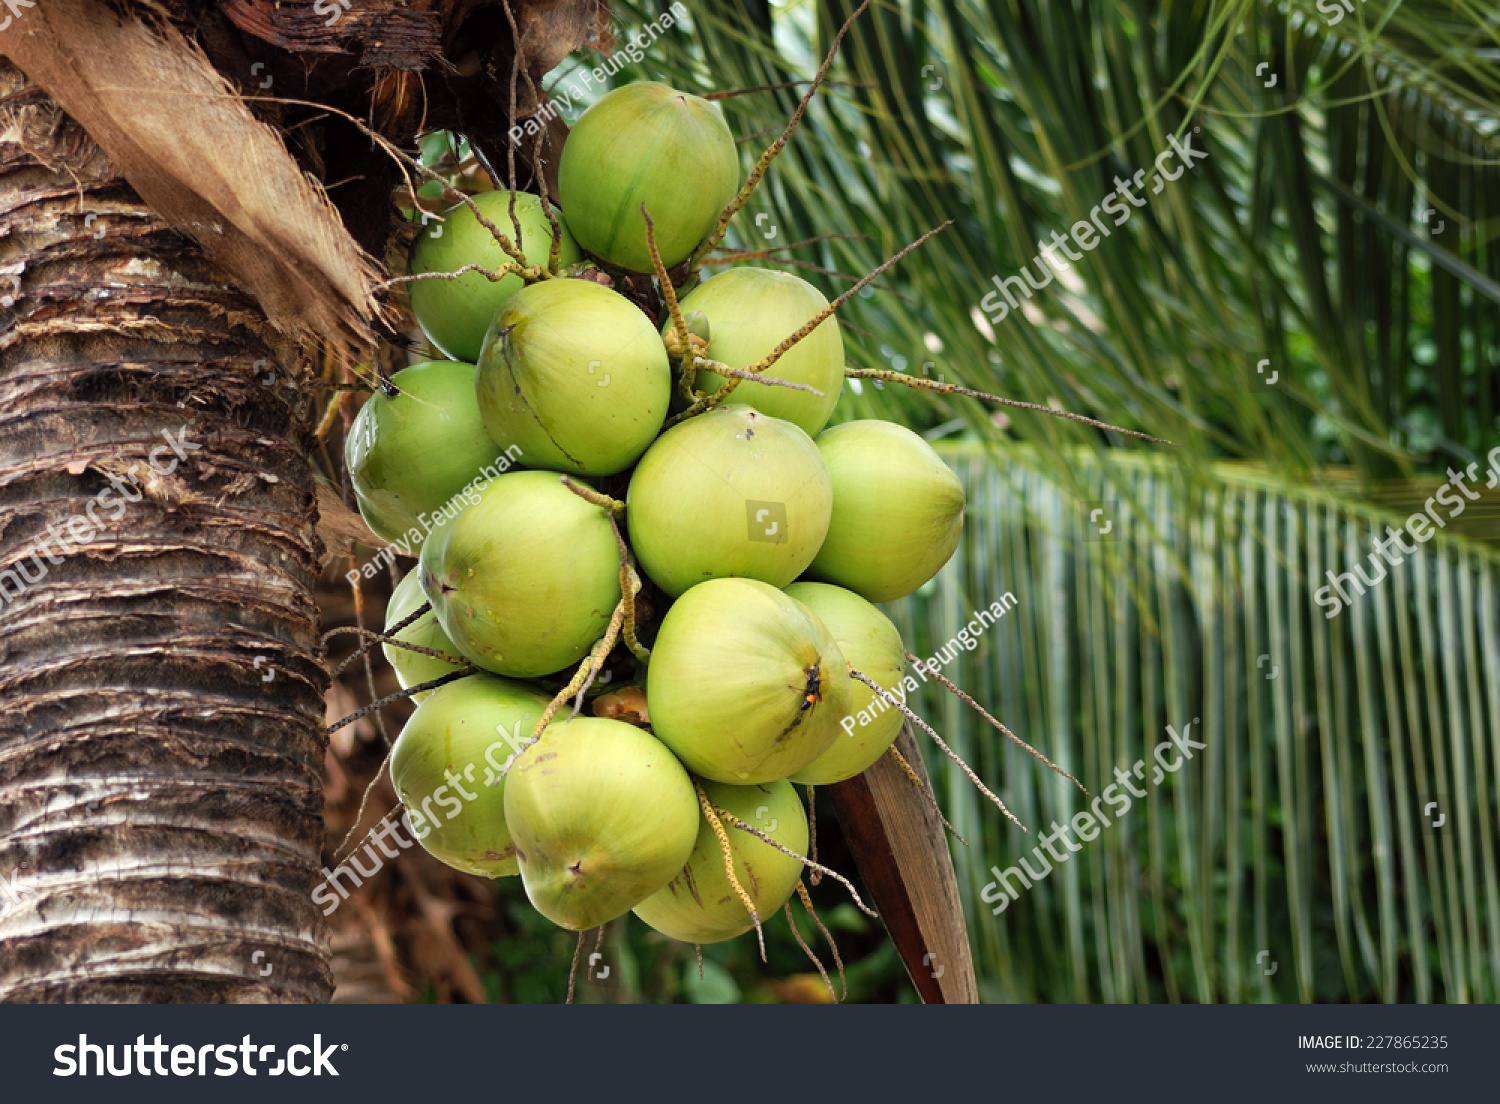 Coconut Group 118